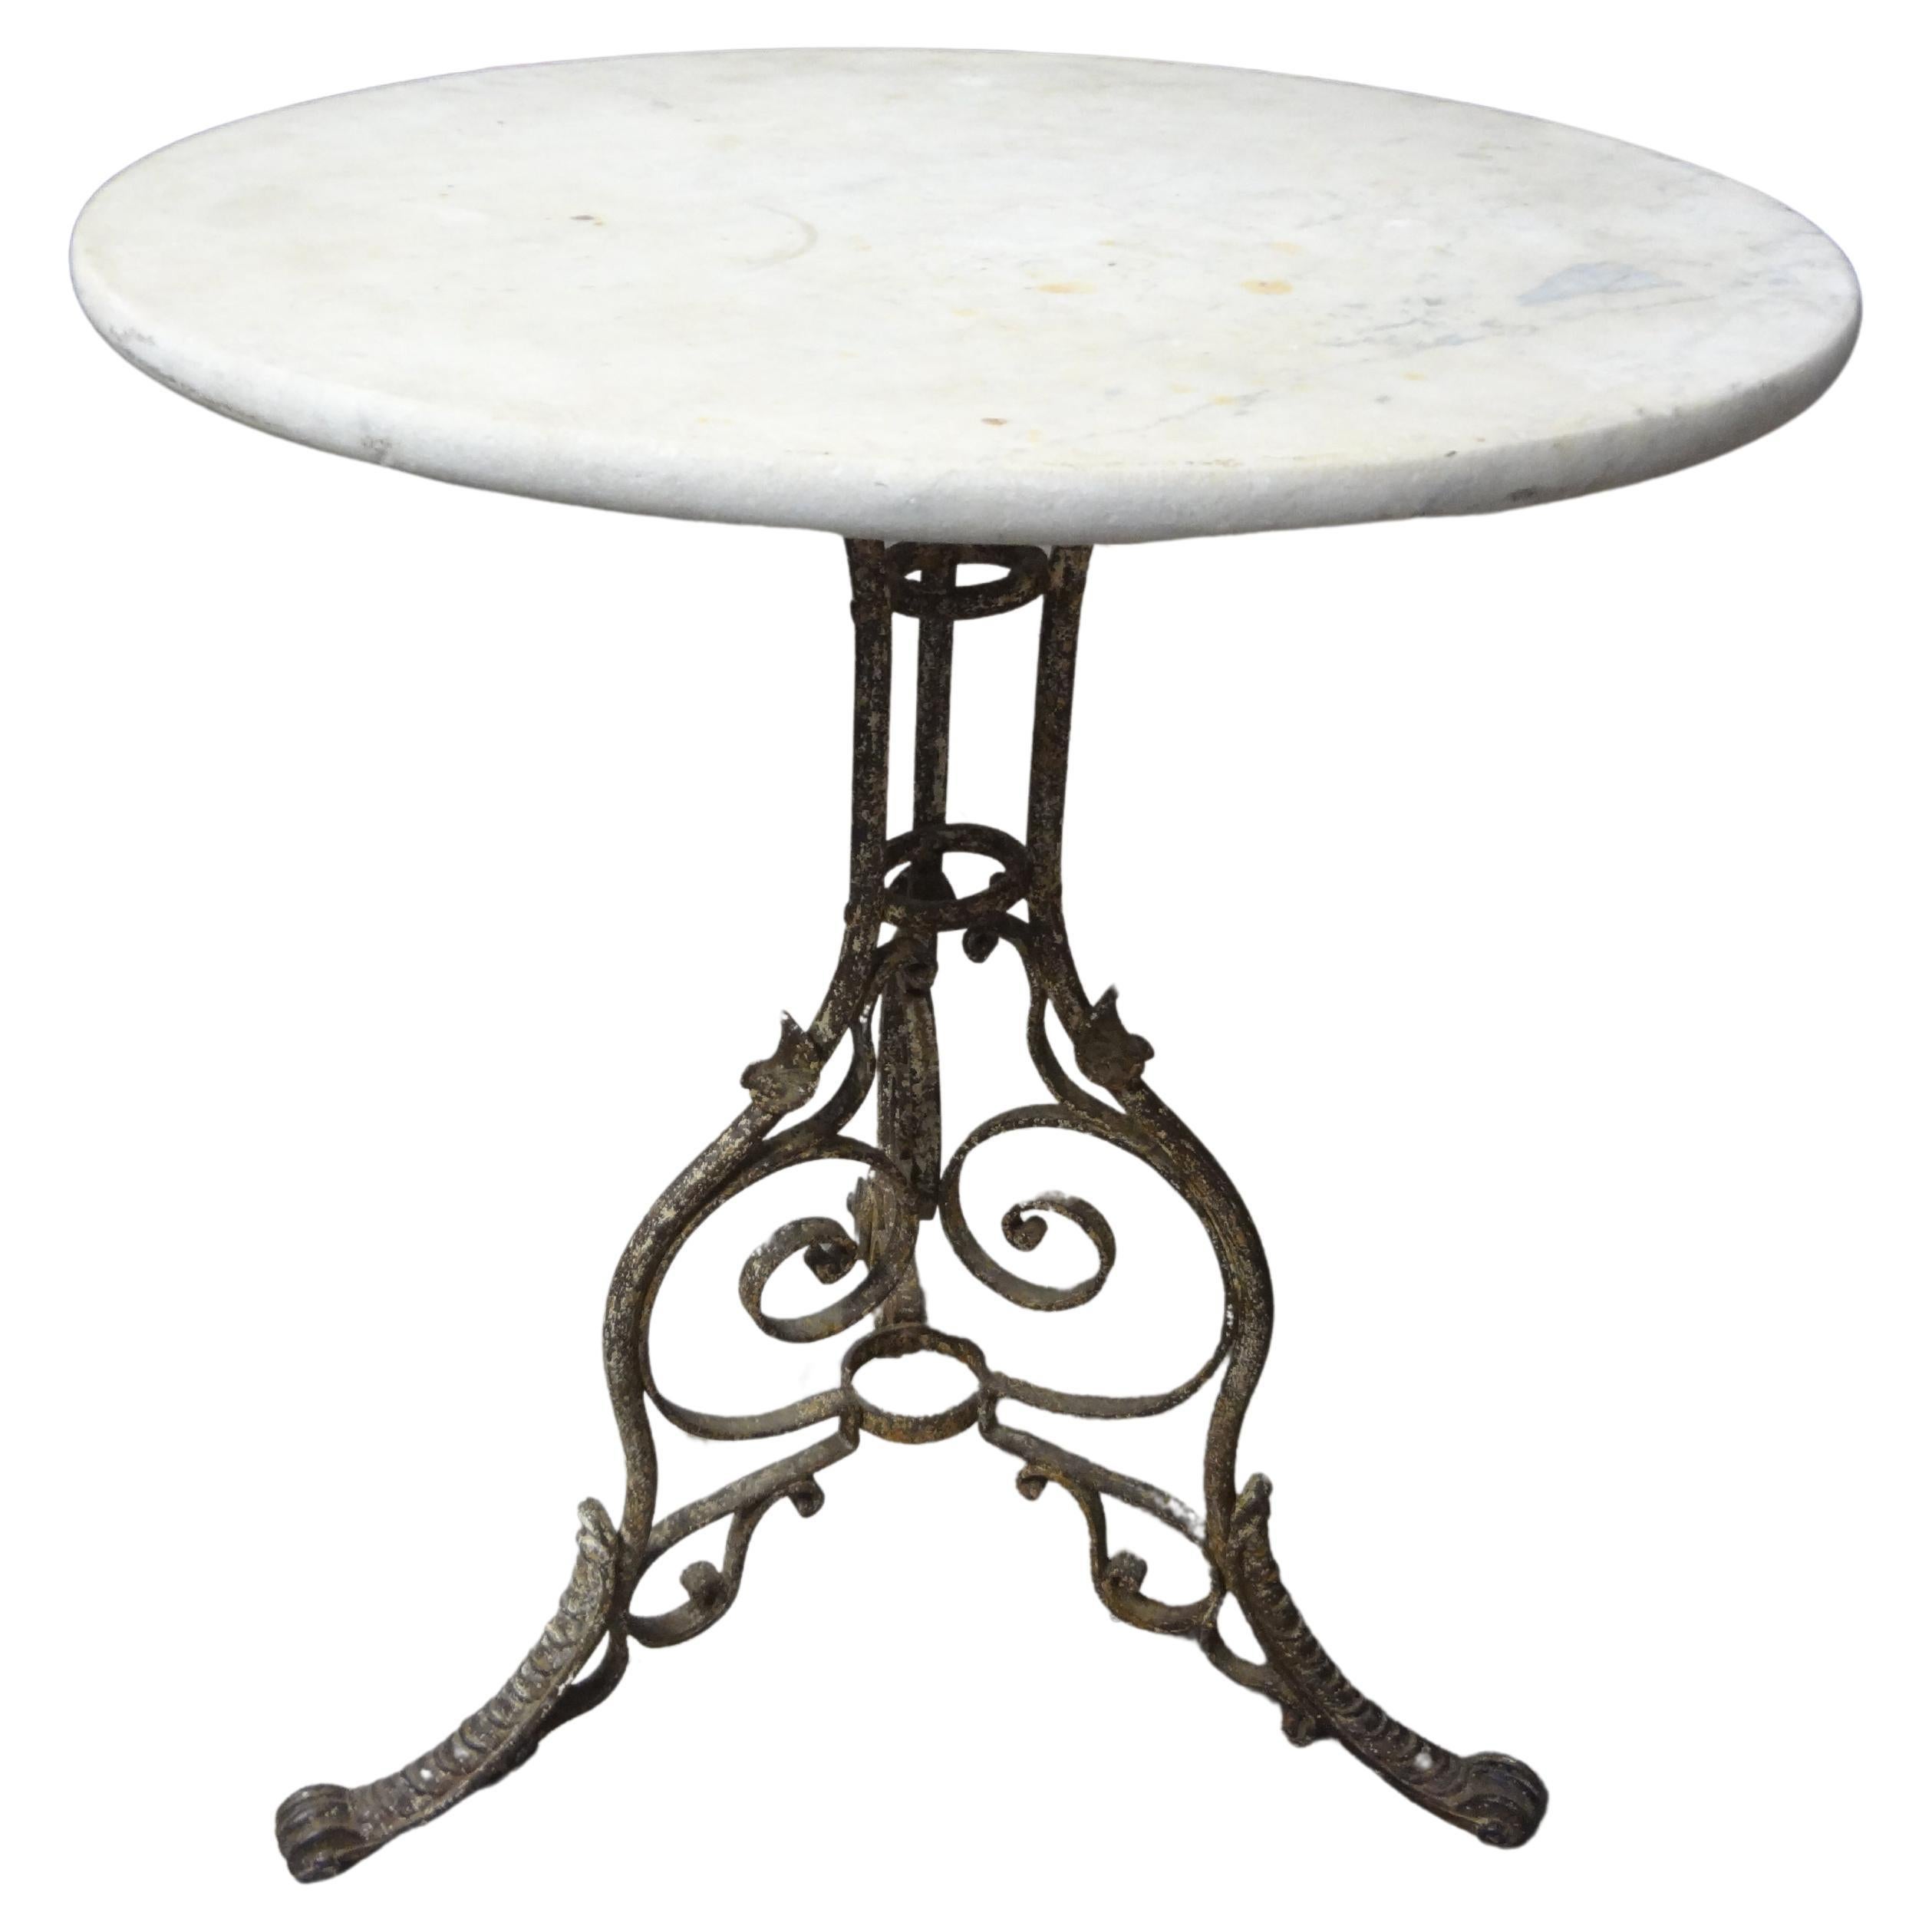 19th Century French Iron And Marble Garden Table